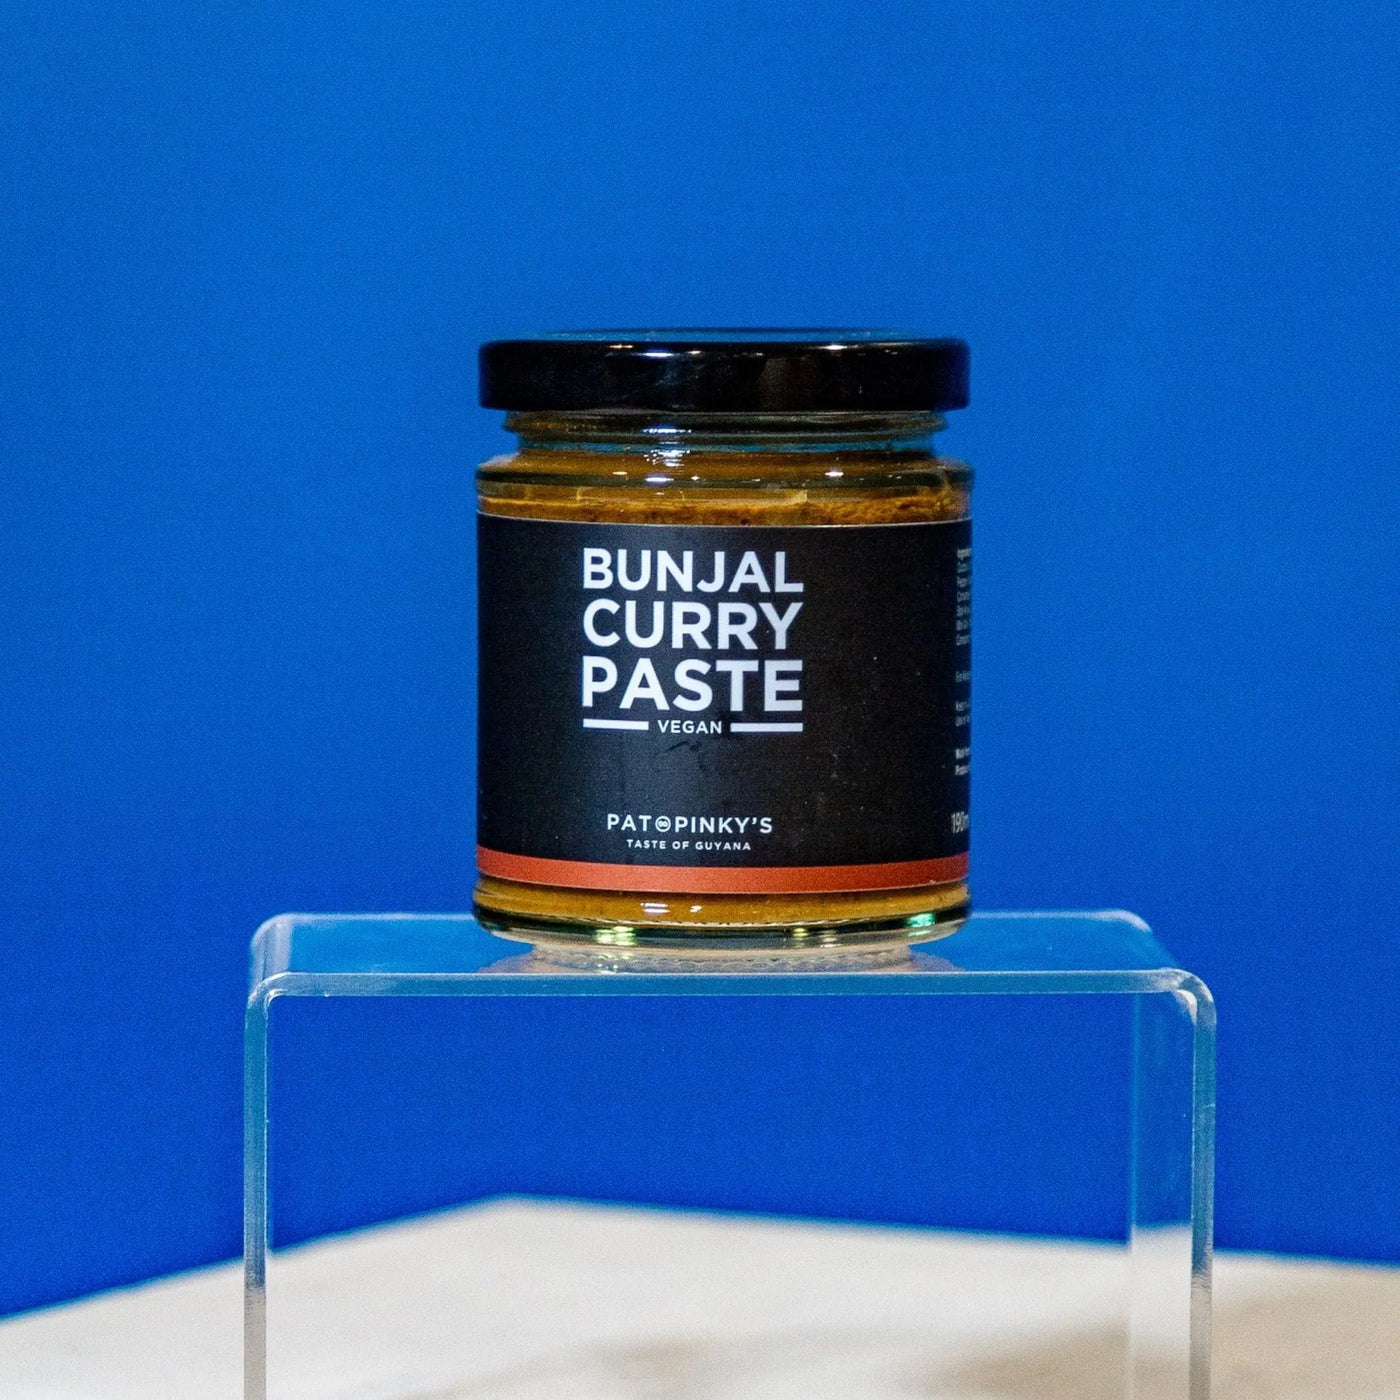 Pat and Pinky's - Bunjal Curry Paste - Migration Museum Shop